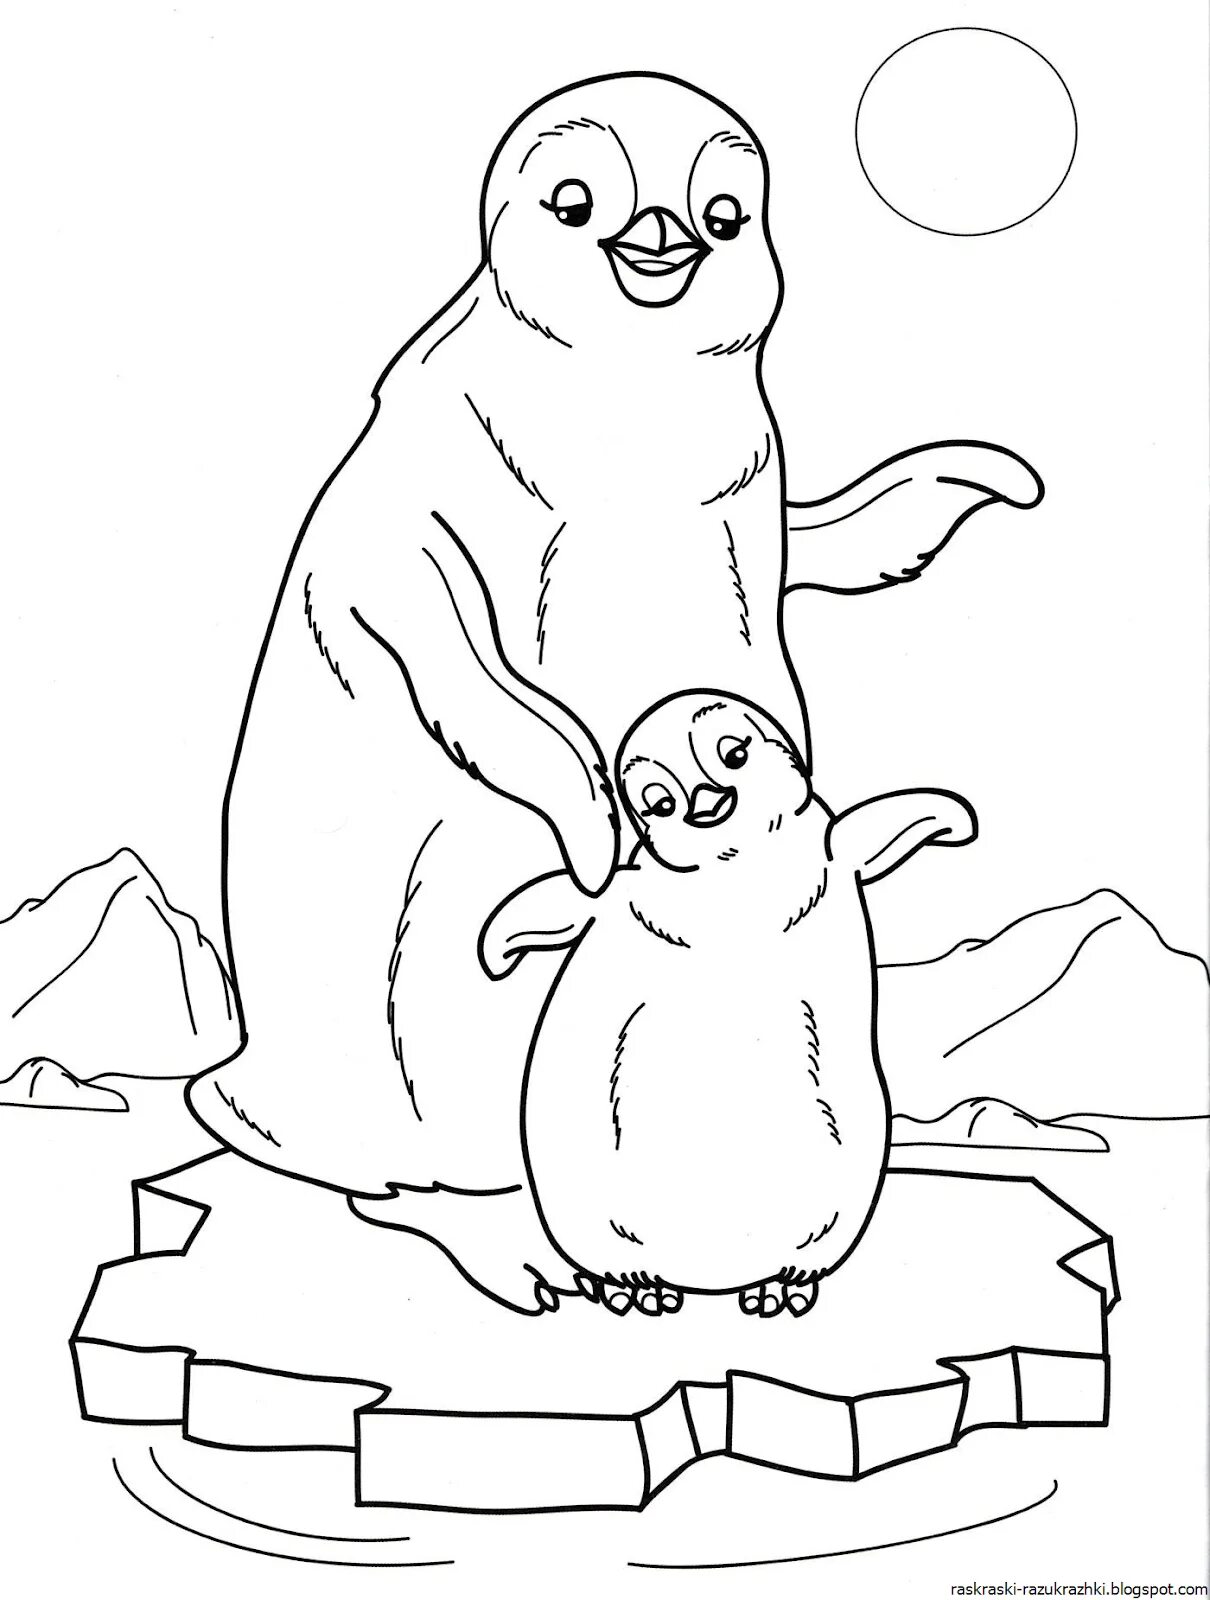 Mystical penguin on an ice floe coloring pages for children